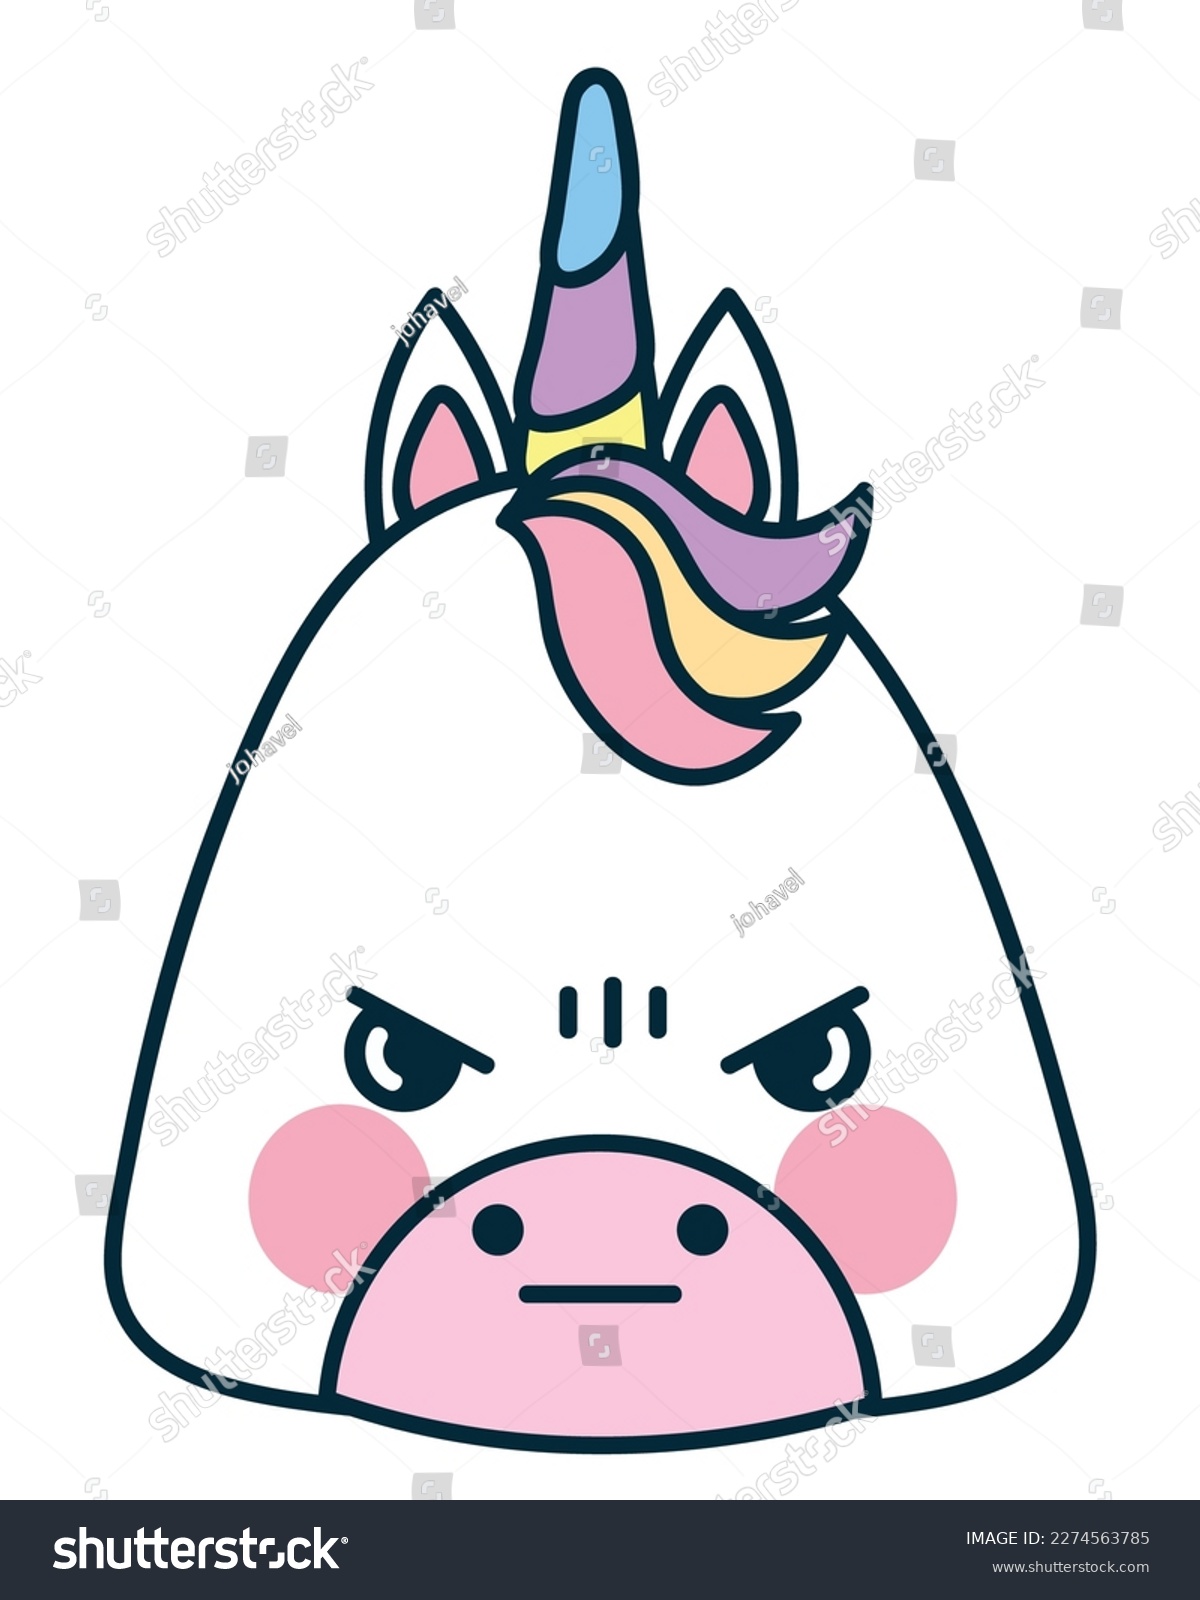 SVG of angry unicorn head doodle icon isolated svg